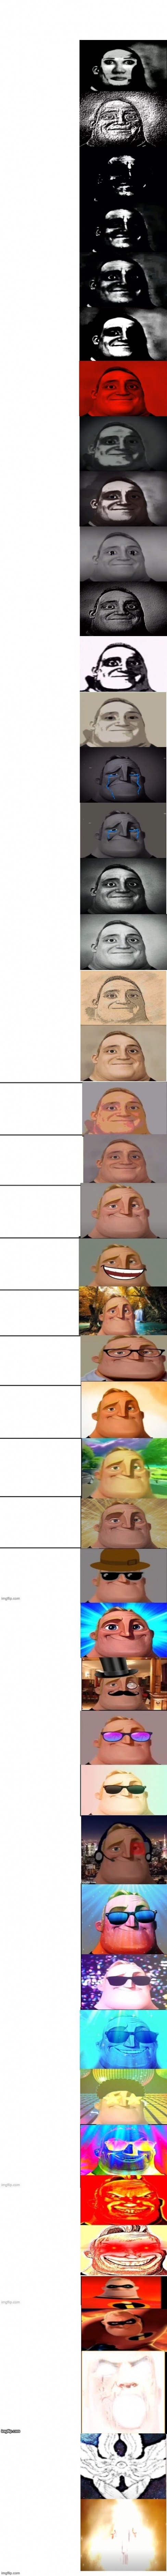 Mr Incredible Becoming Canny Mega Extended Blank Meme Template